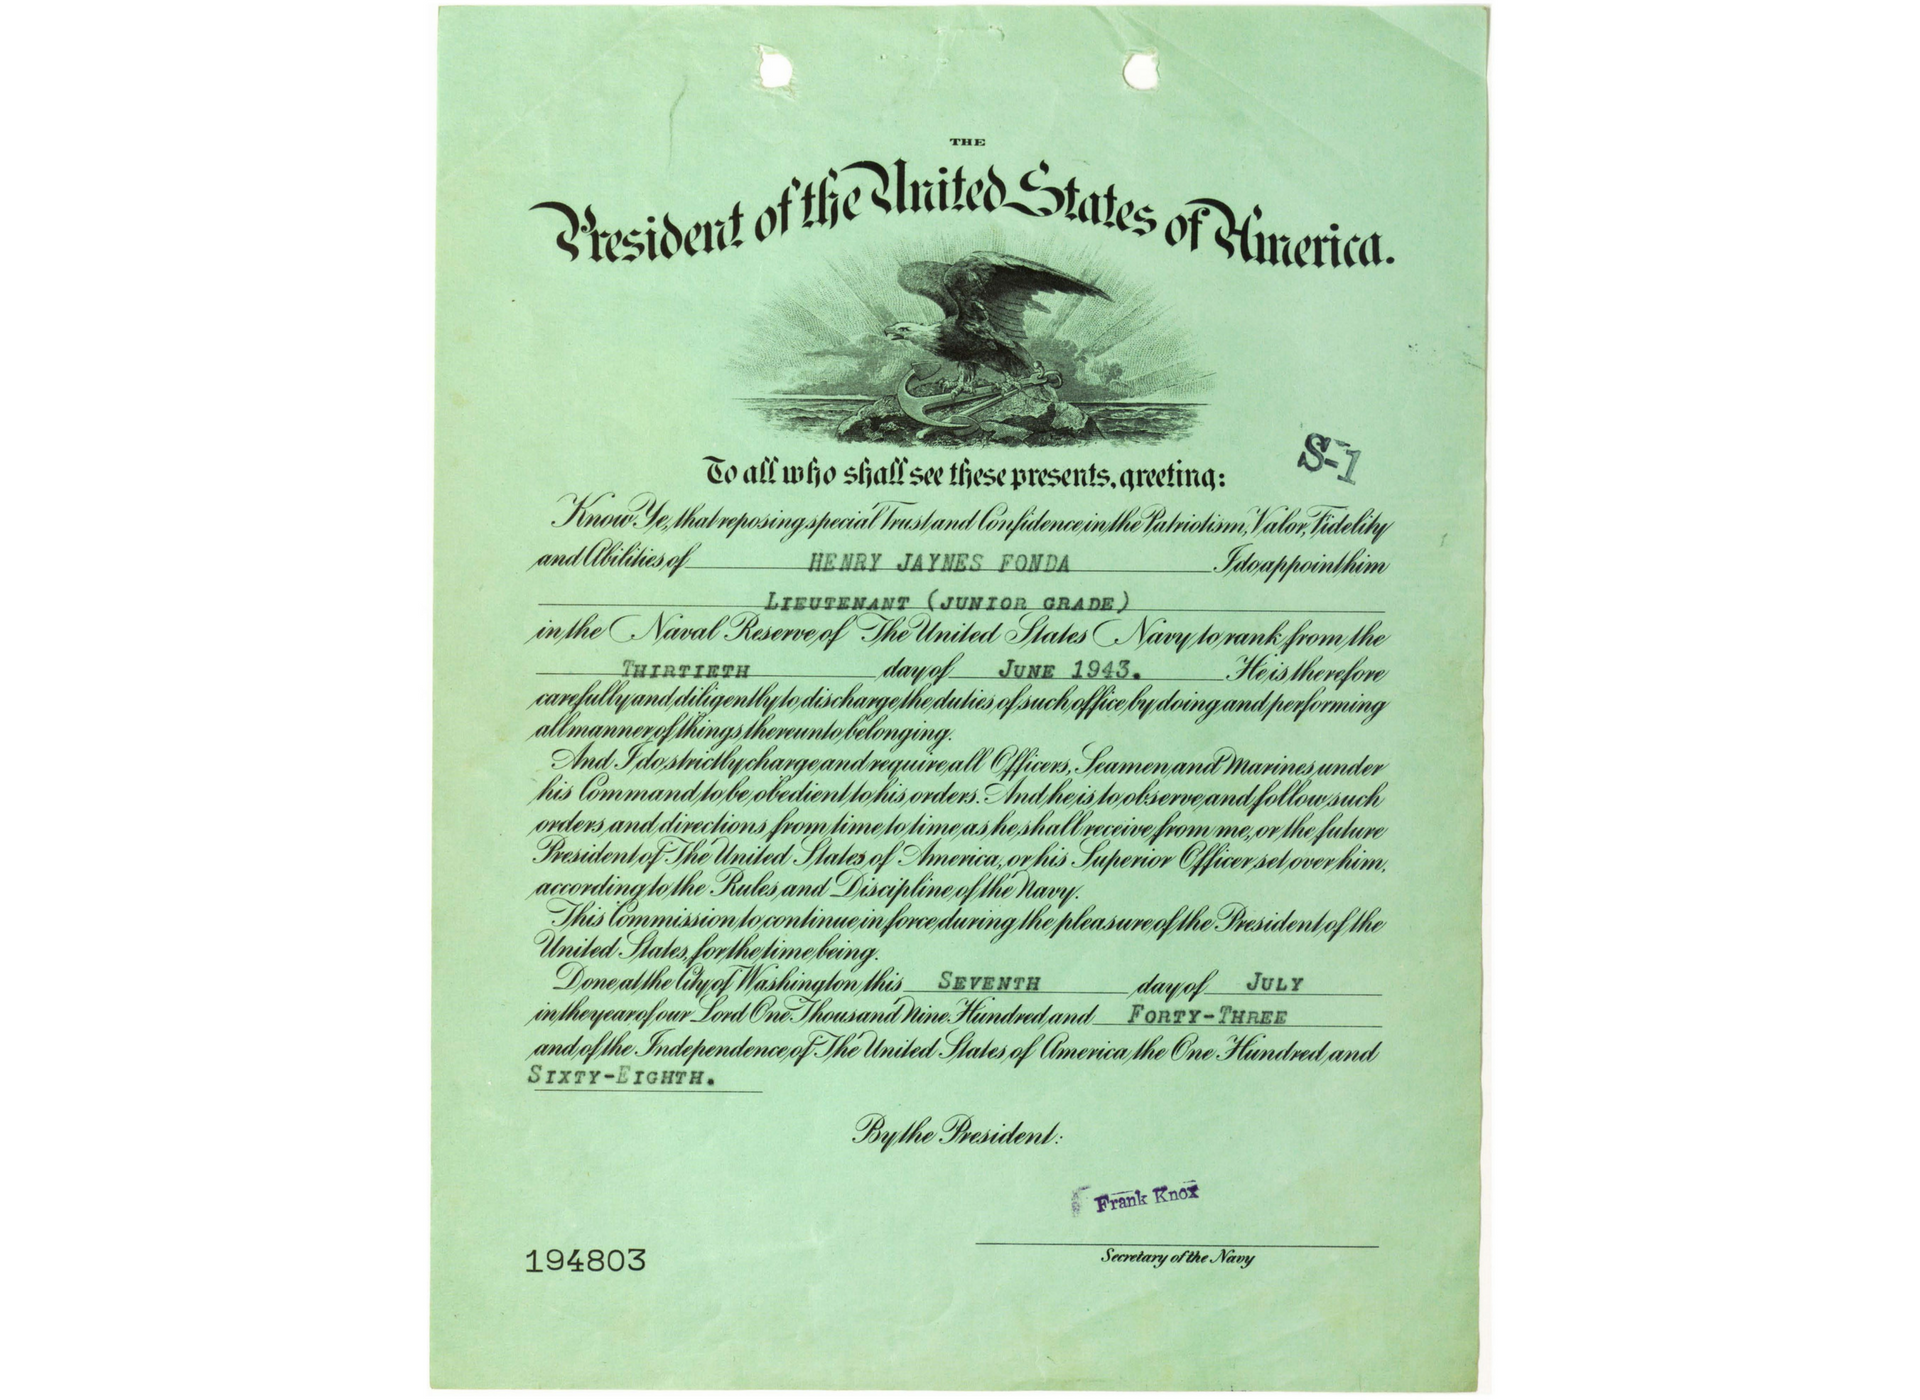 Certificate of appointment to Lieutenant, junior grade presented to Fonda. The National Archives. 